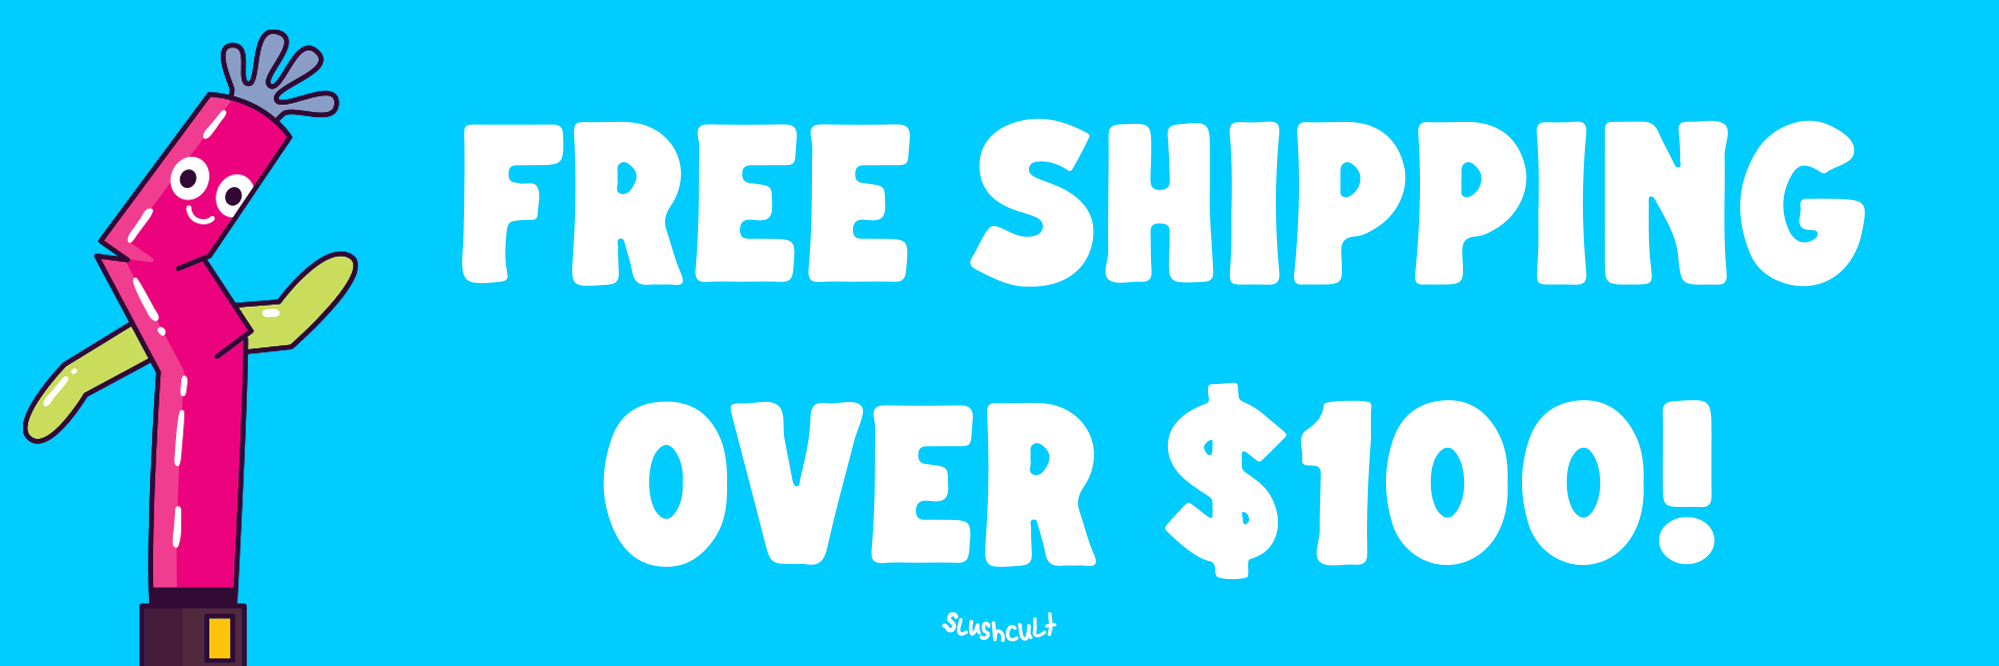 cartoon image with text "free shipping over $100"